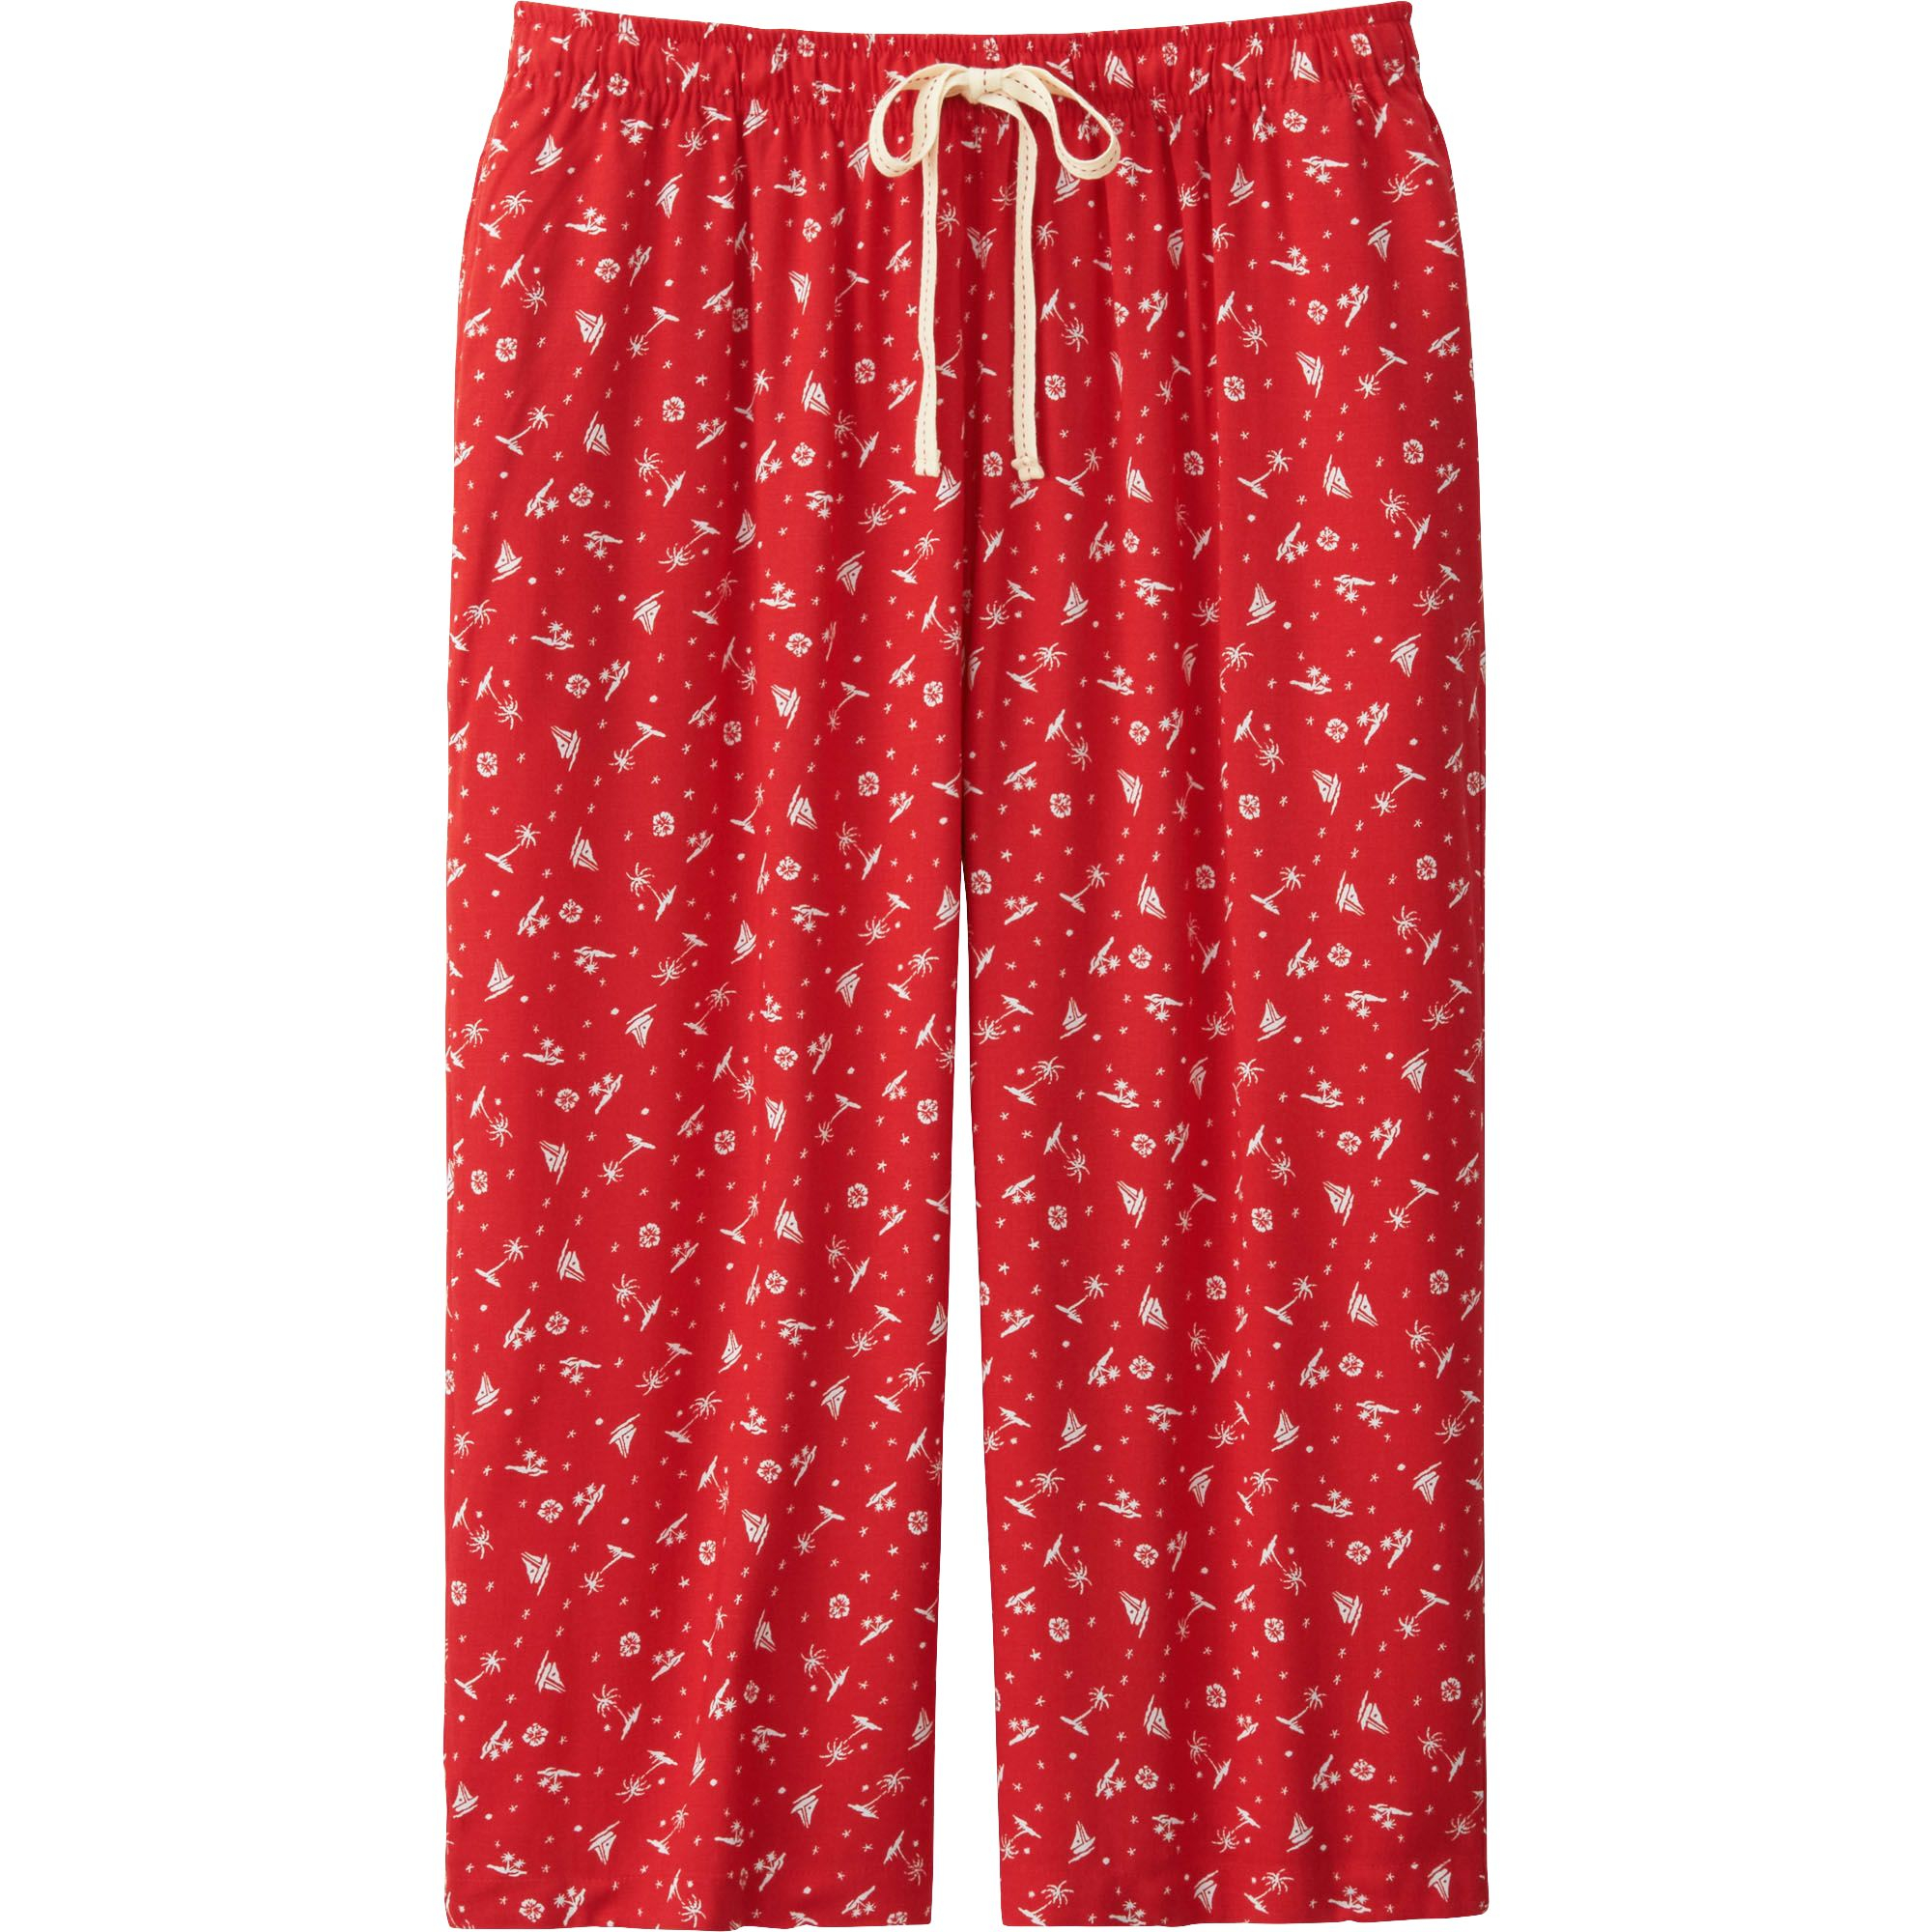 Uniqlo | Red Relaco 3/4 Shorts (Sailboat) | Lyst